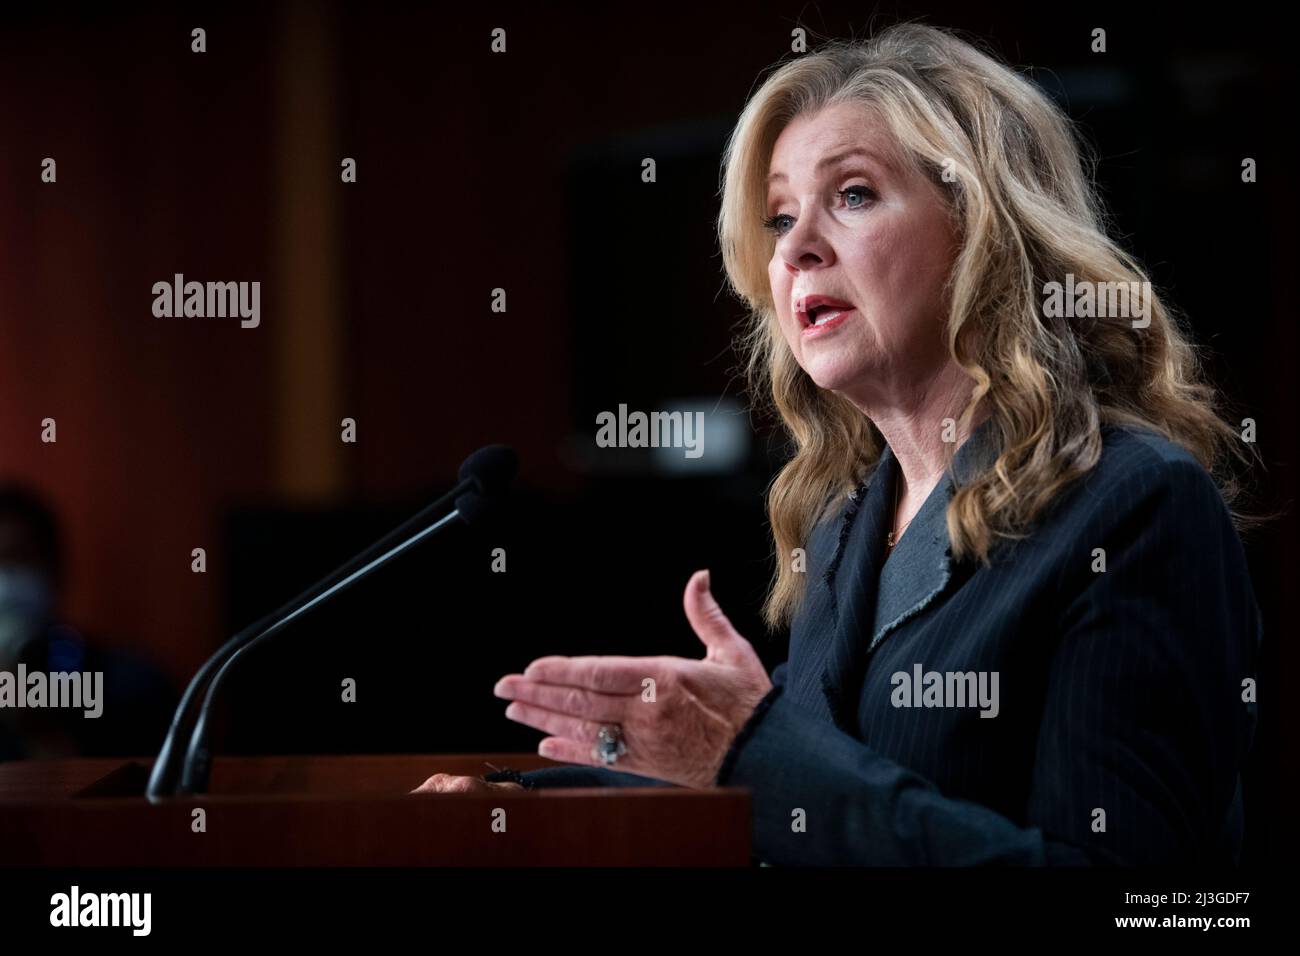 United States Senator Marsha Blackburn (Republican of Tennessee) offers remarks of her opposition to the pending confirmation of Judge Ketanji Brown Jackson to be an Associate Justice of the Supreme Court of the United States, prior to the Senate vote at the US Capitol in Washington, DC, Thursday, April 7, 2022. Credit: Rod Lamkey / CNP/Sipa USA Stock Photo